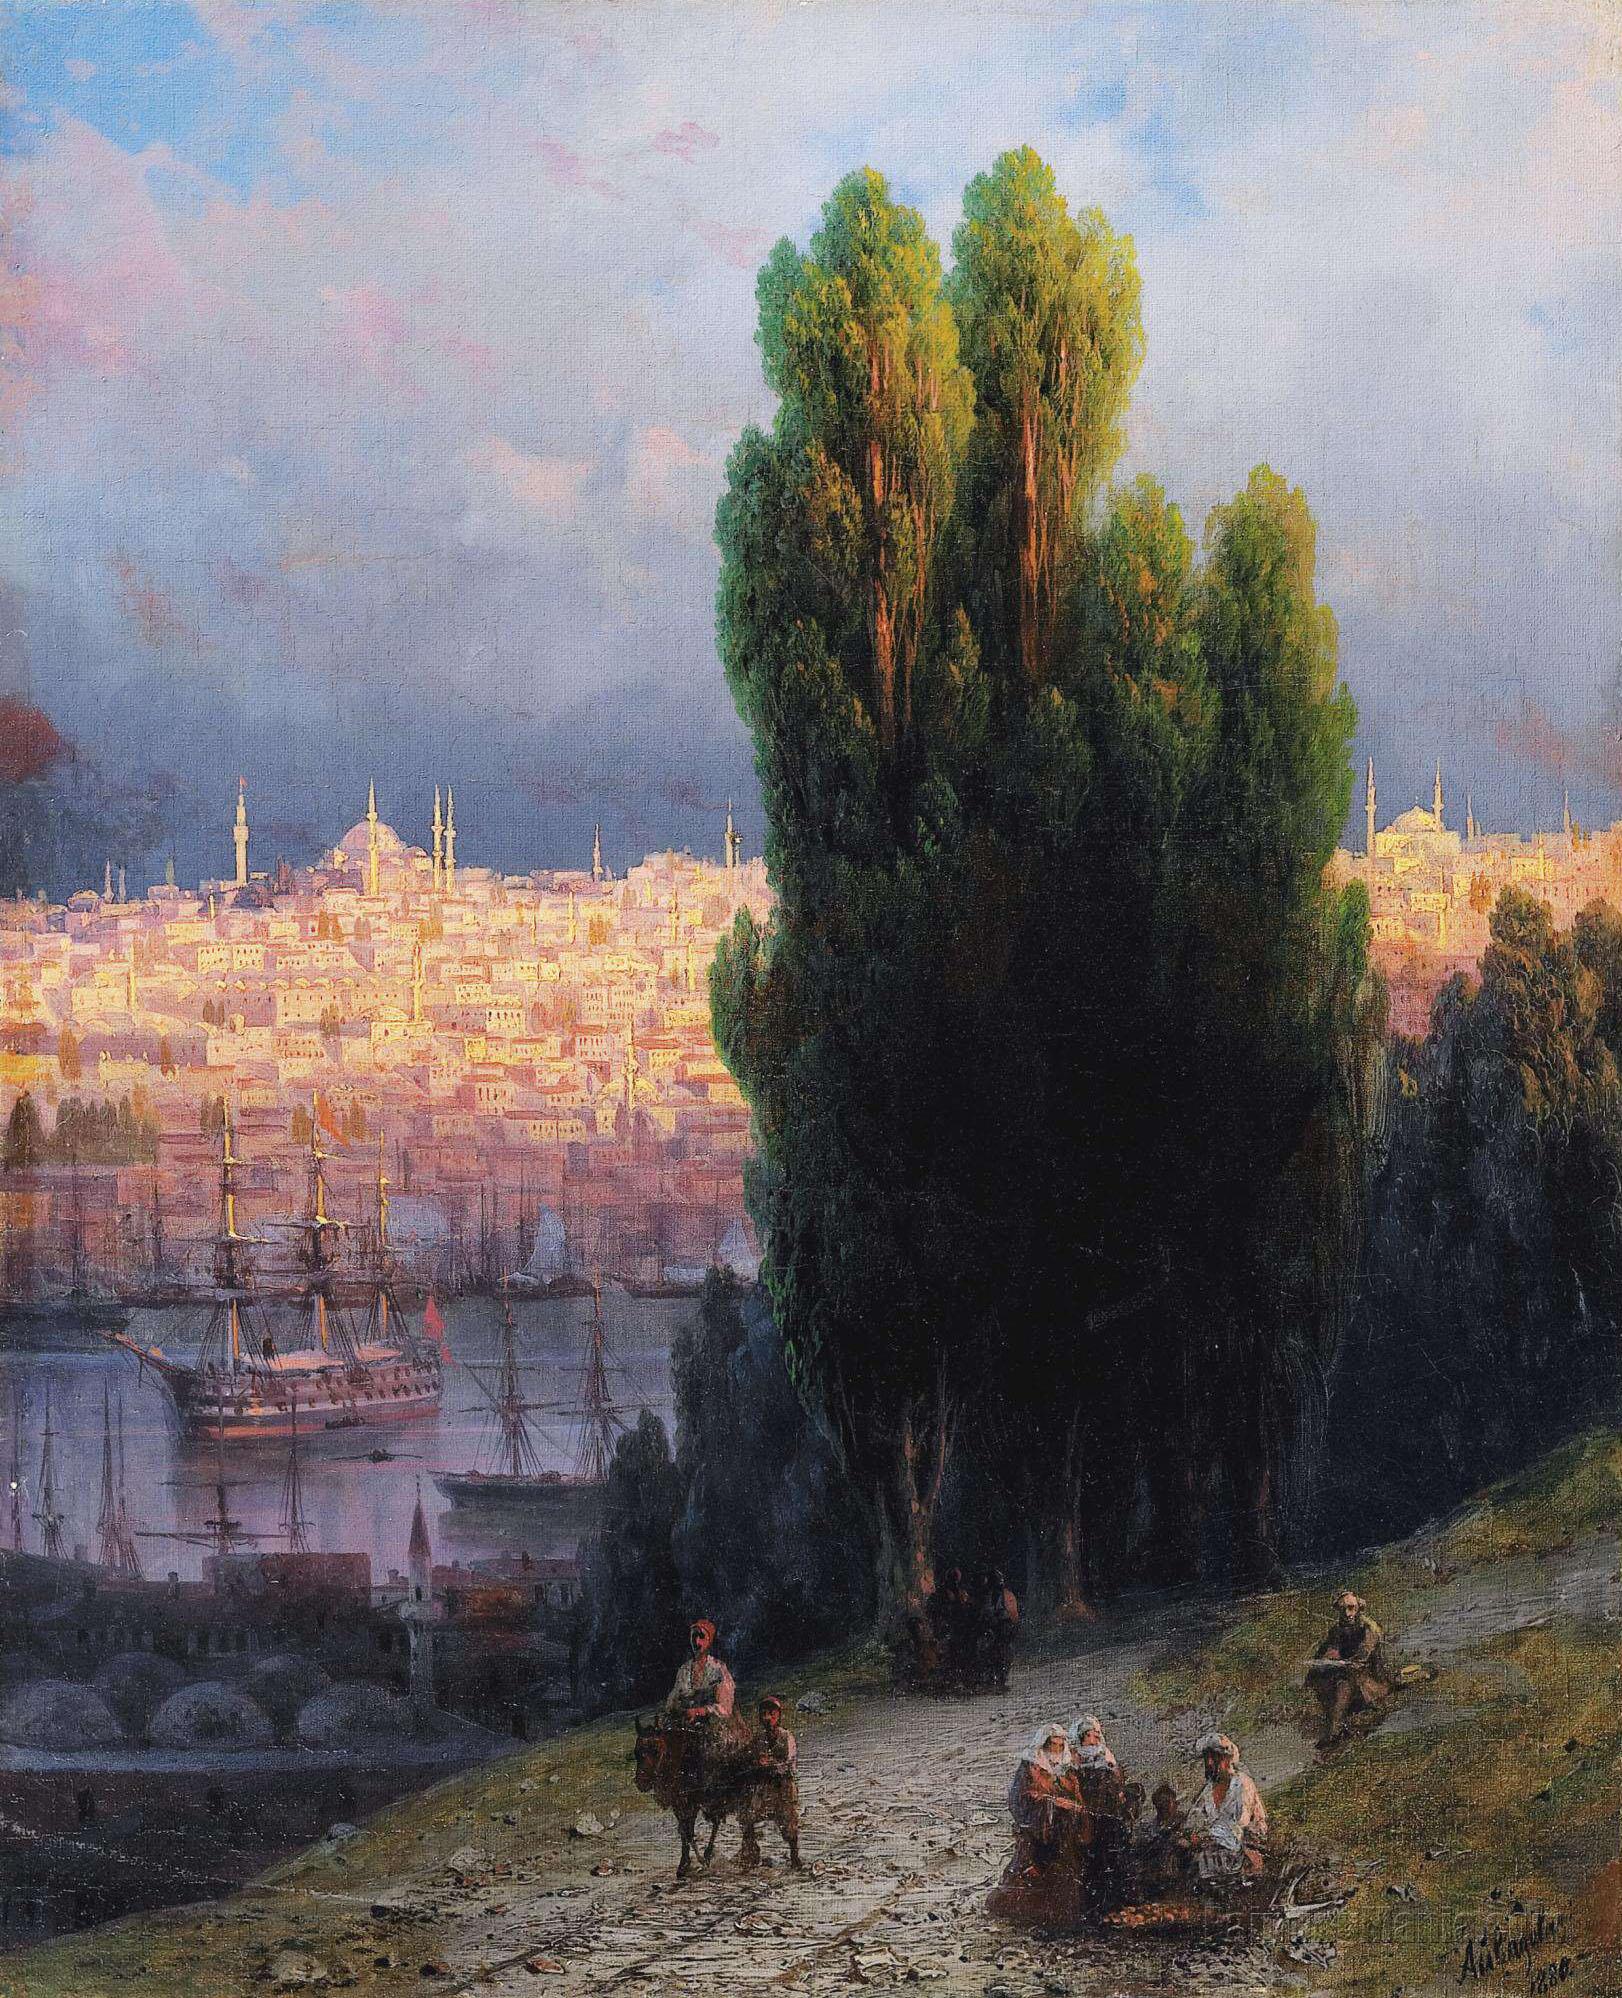 Constantinople, View of the Golden Horn with a Self-Portrait of the Artist Sketching